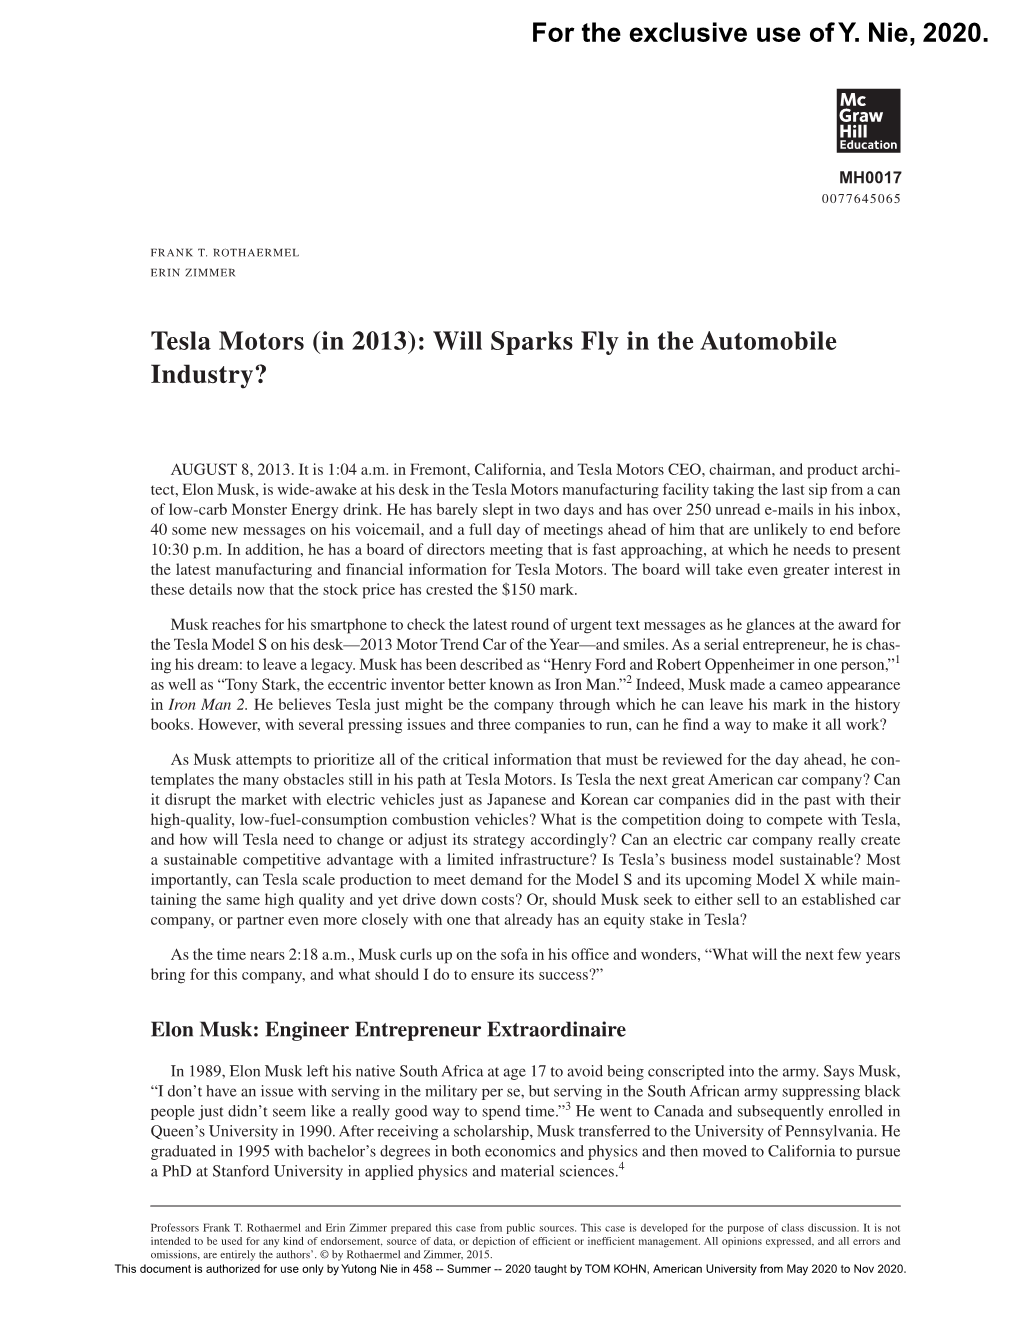 Tesla Motors (In 2013): Will Sparks Fly in the Automobile Industry?